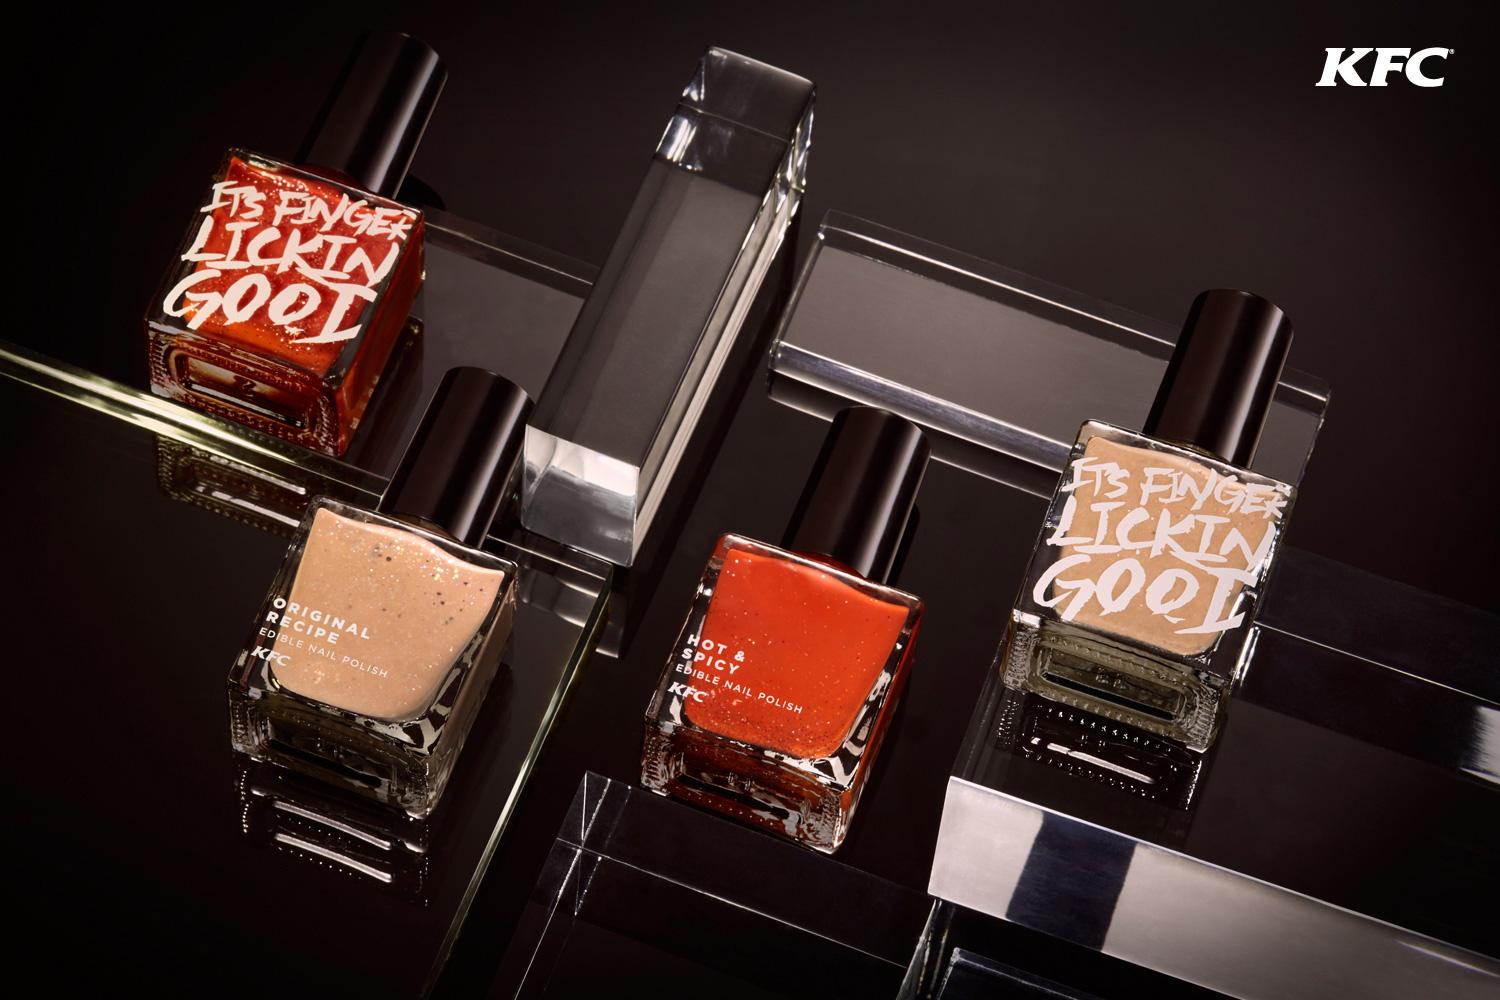 KFC launched edible nail polishes in 2016